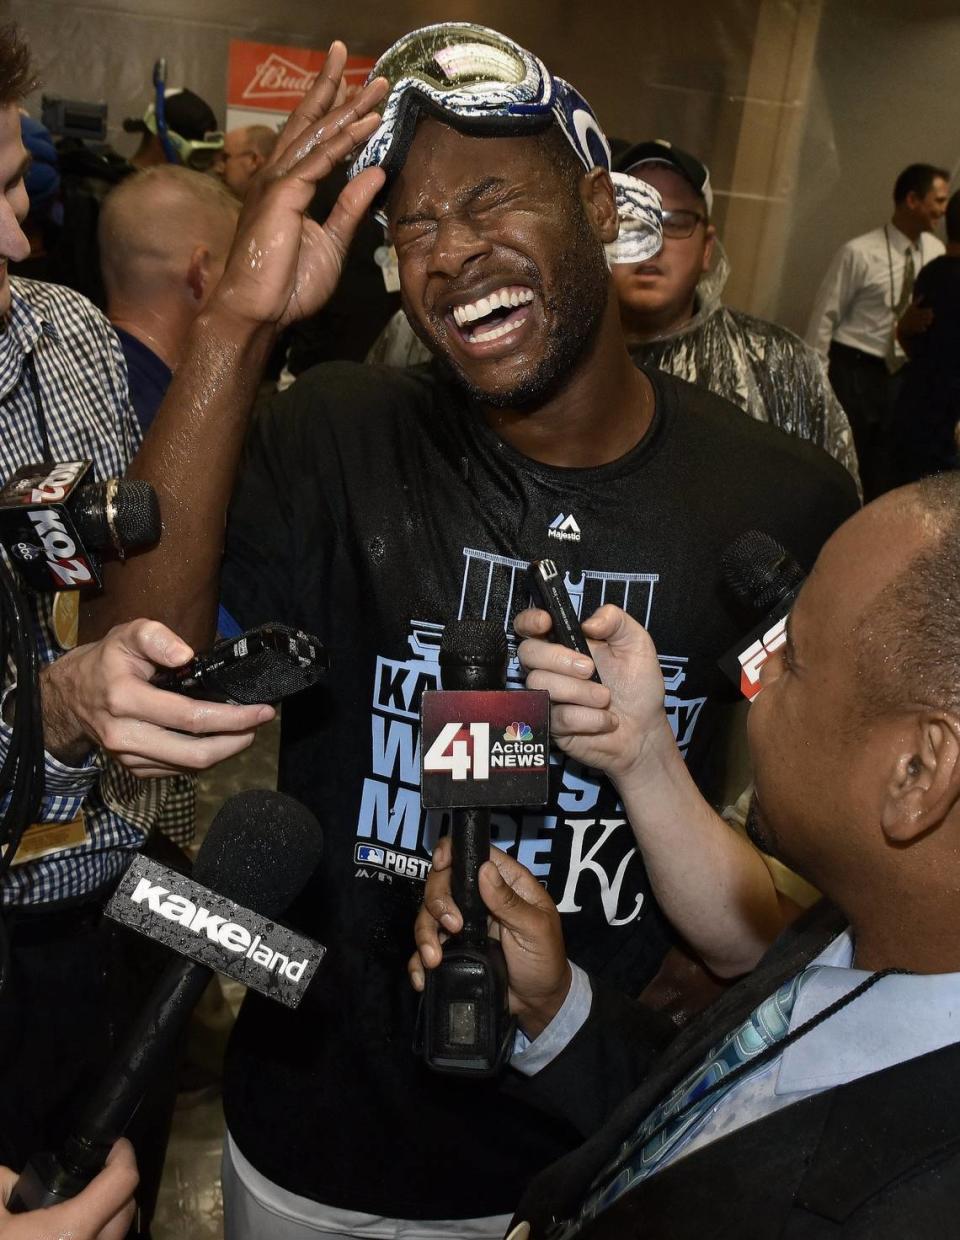 Kansas City Royals’ Lorenzo Cain celebrates with champagne in the clubhouse after their 7-2 win over the Houston Astros during an ALDS baseball game 5 on October 14, 2015 at Kauffman Stadium in Kansas City, Mo.